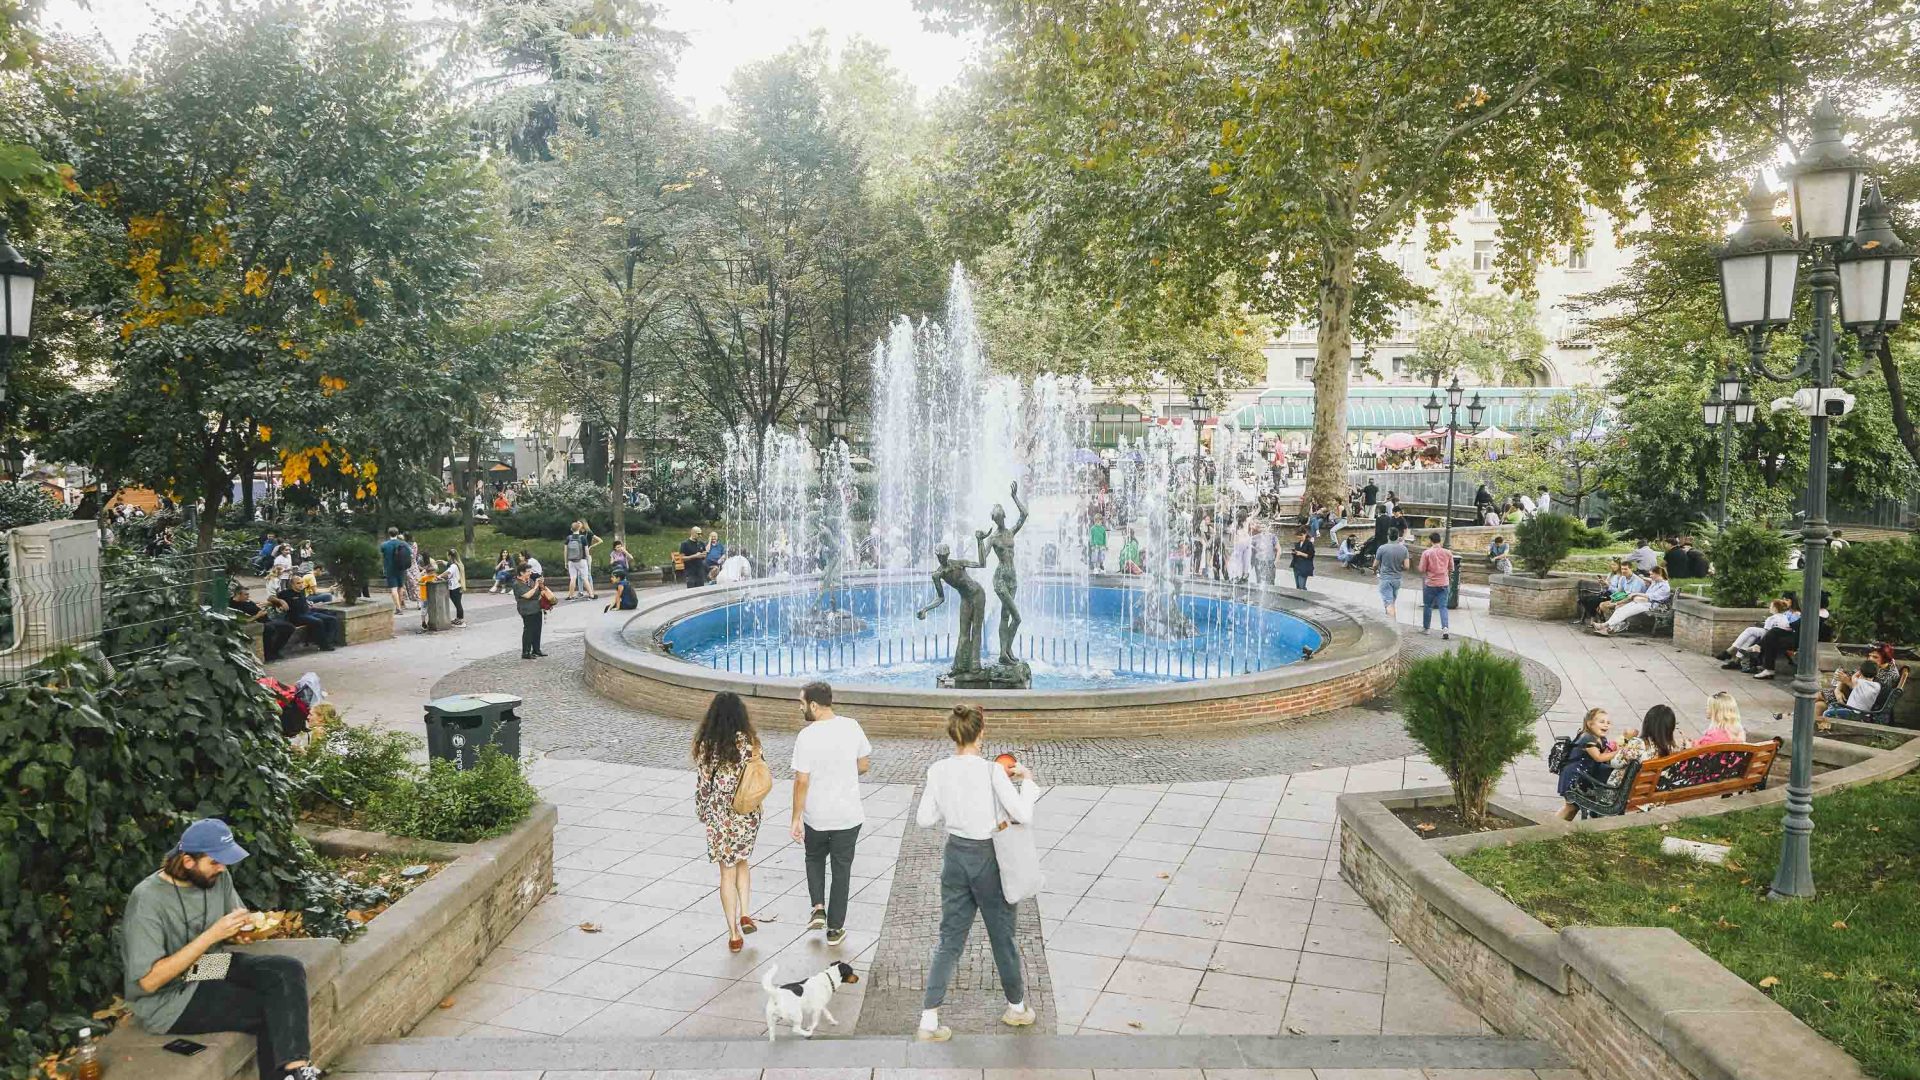 People walk through a park with a fountain.